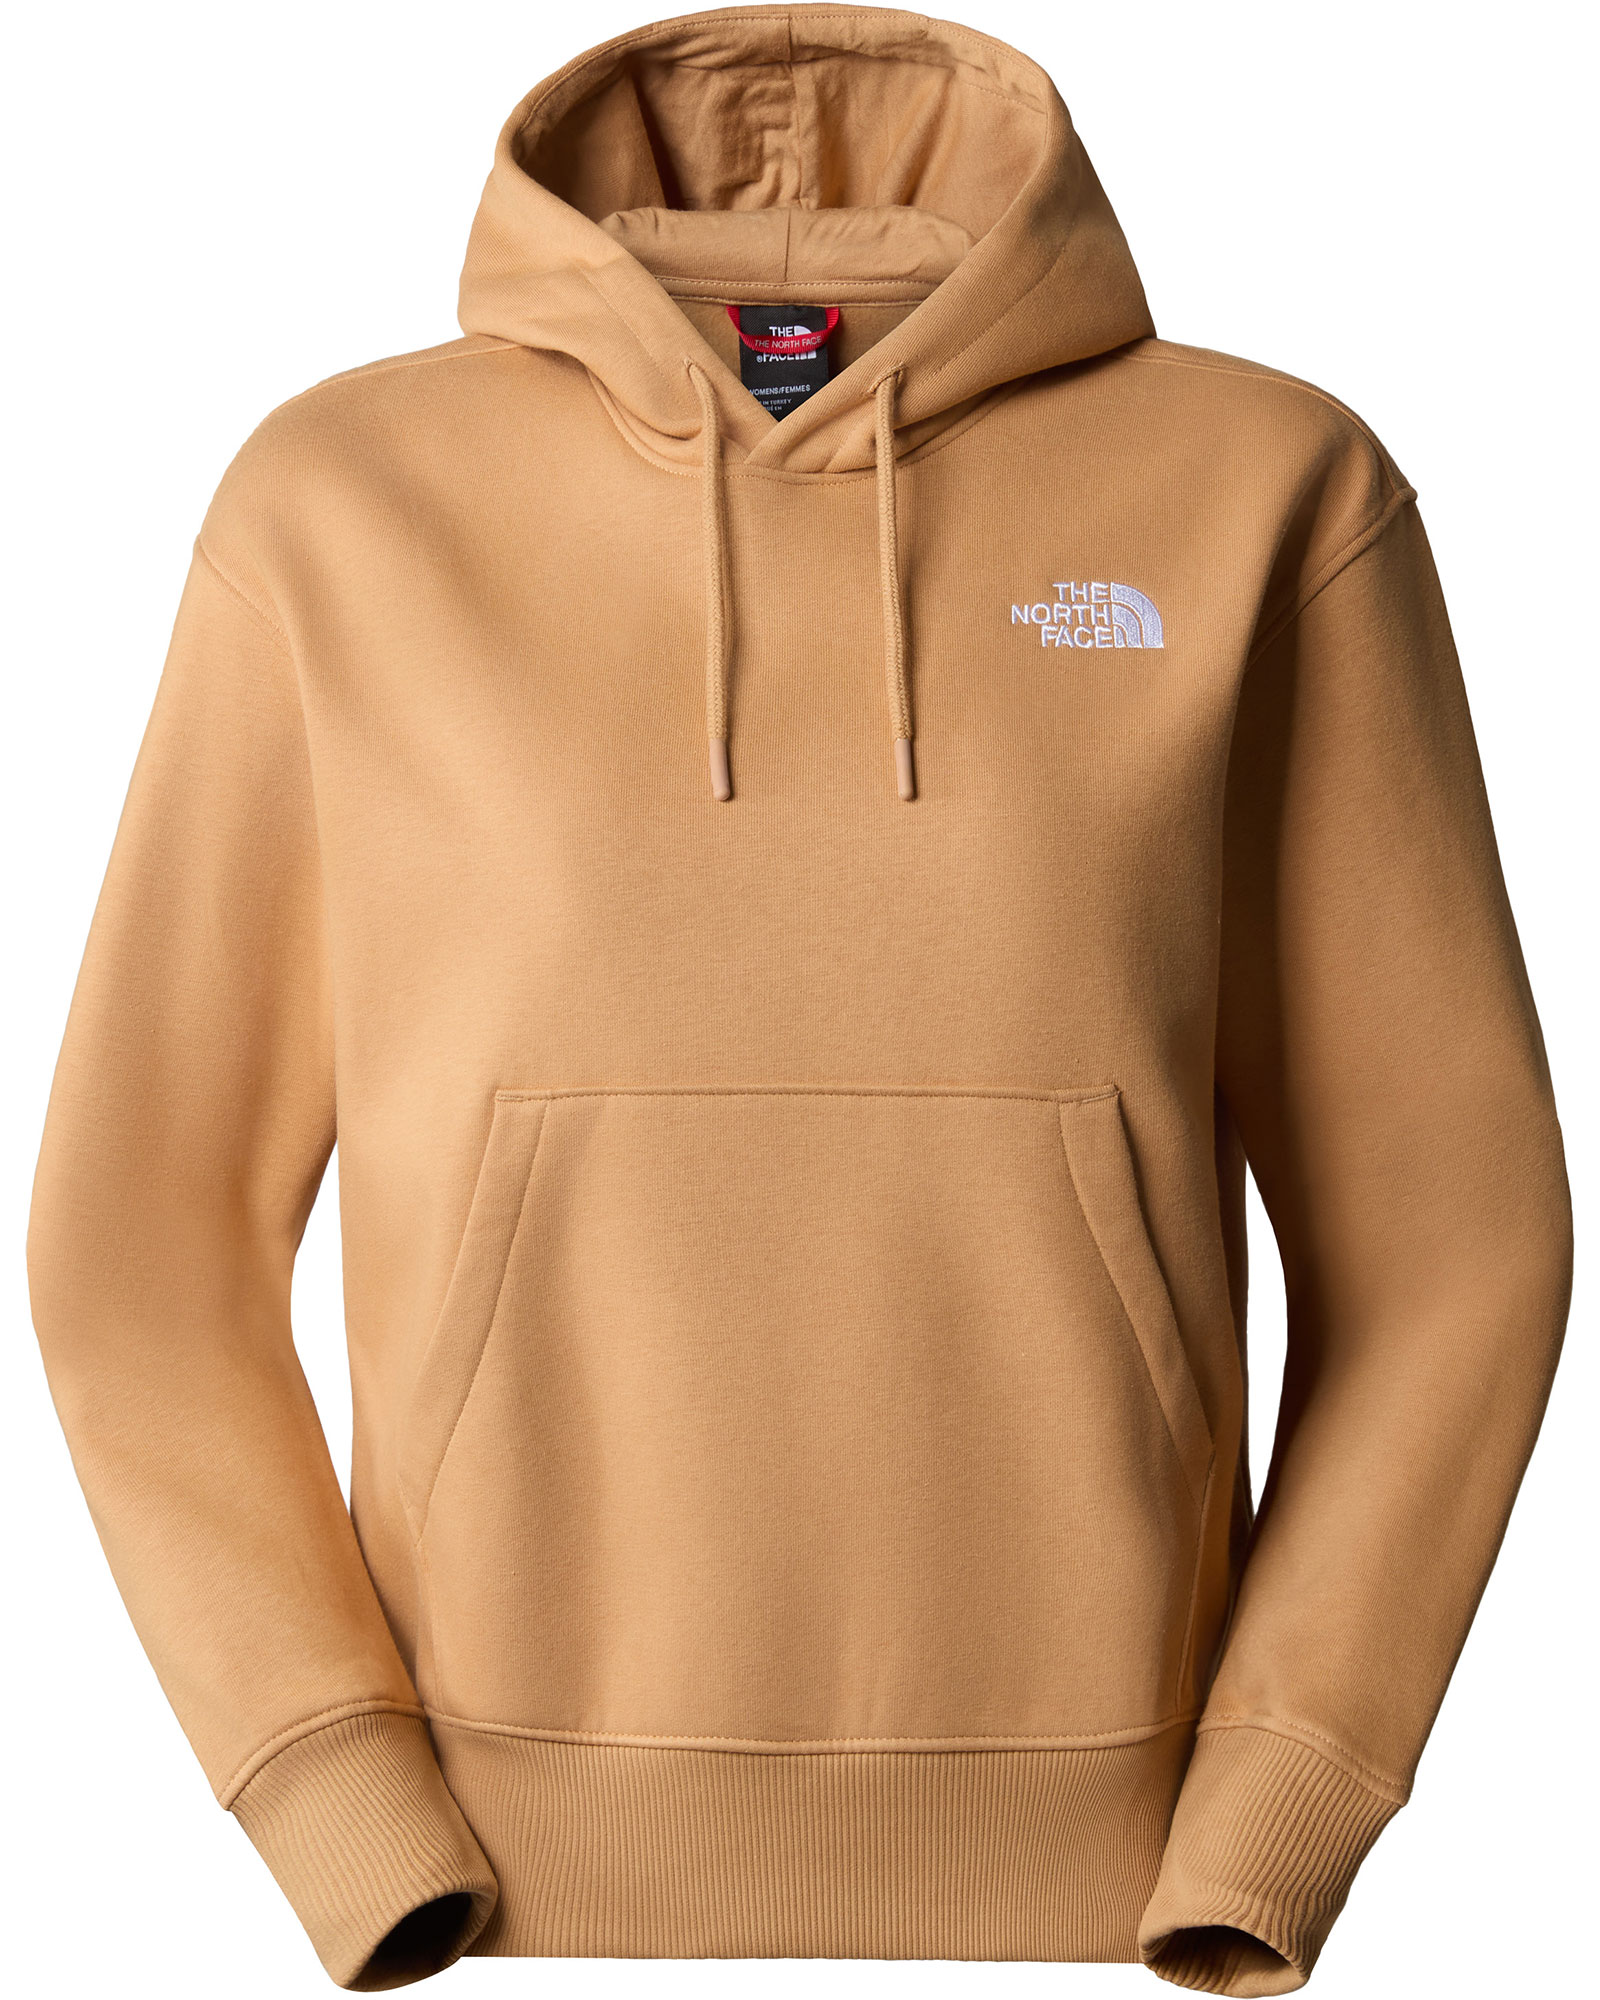 The North Face Women’s Essential Hoodie - Almond Butter L